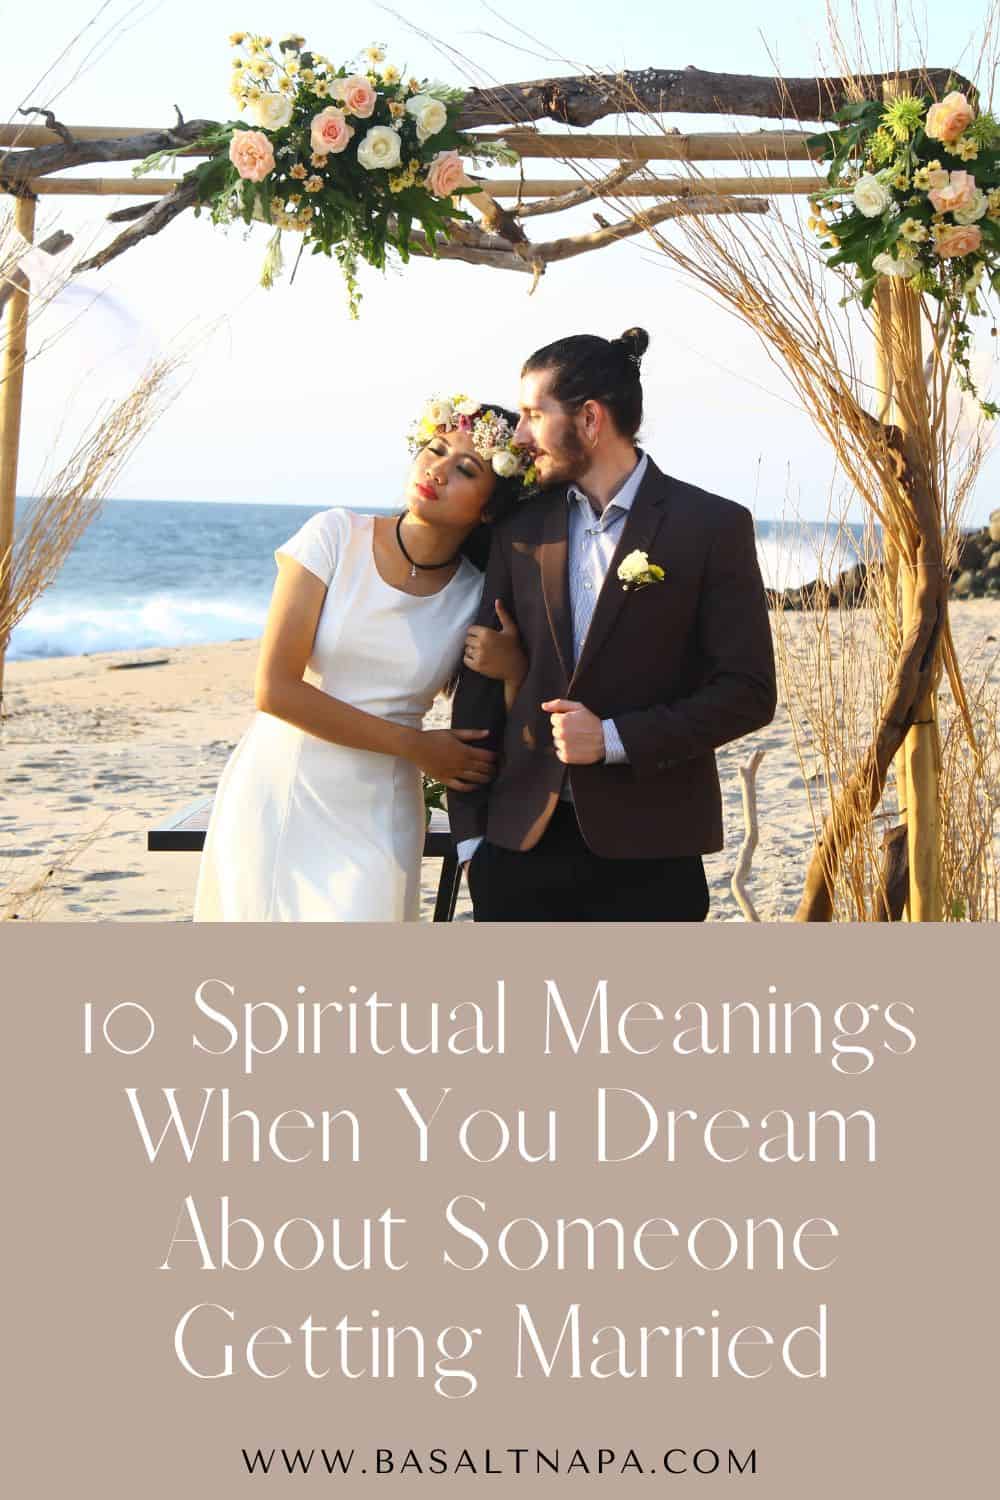 What does it mean when you dream about someone getting married?